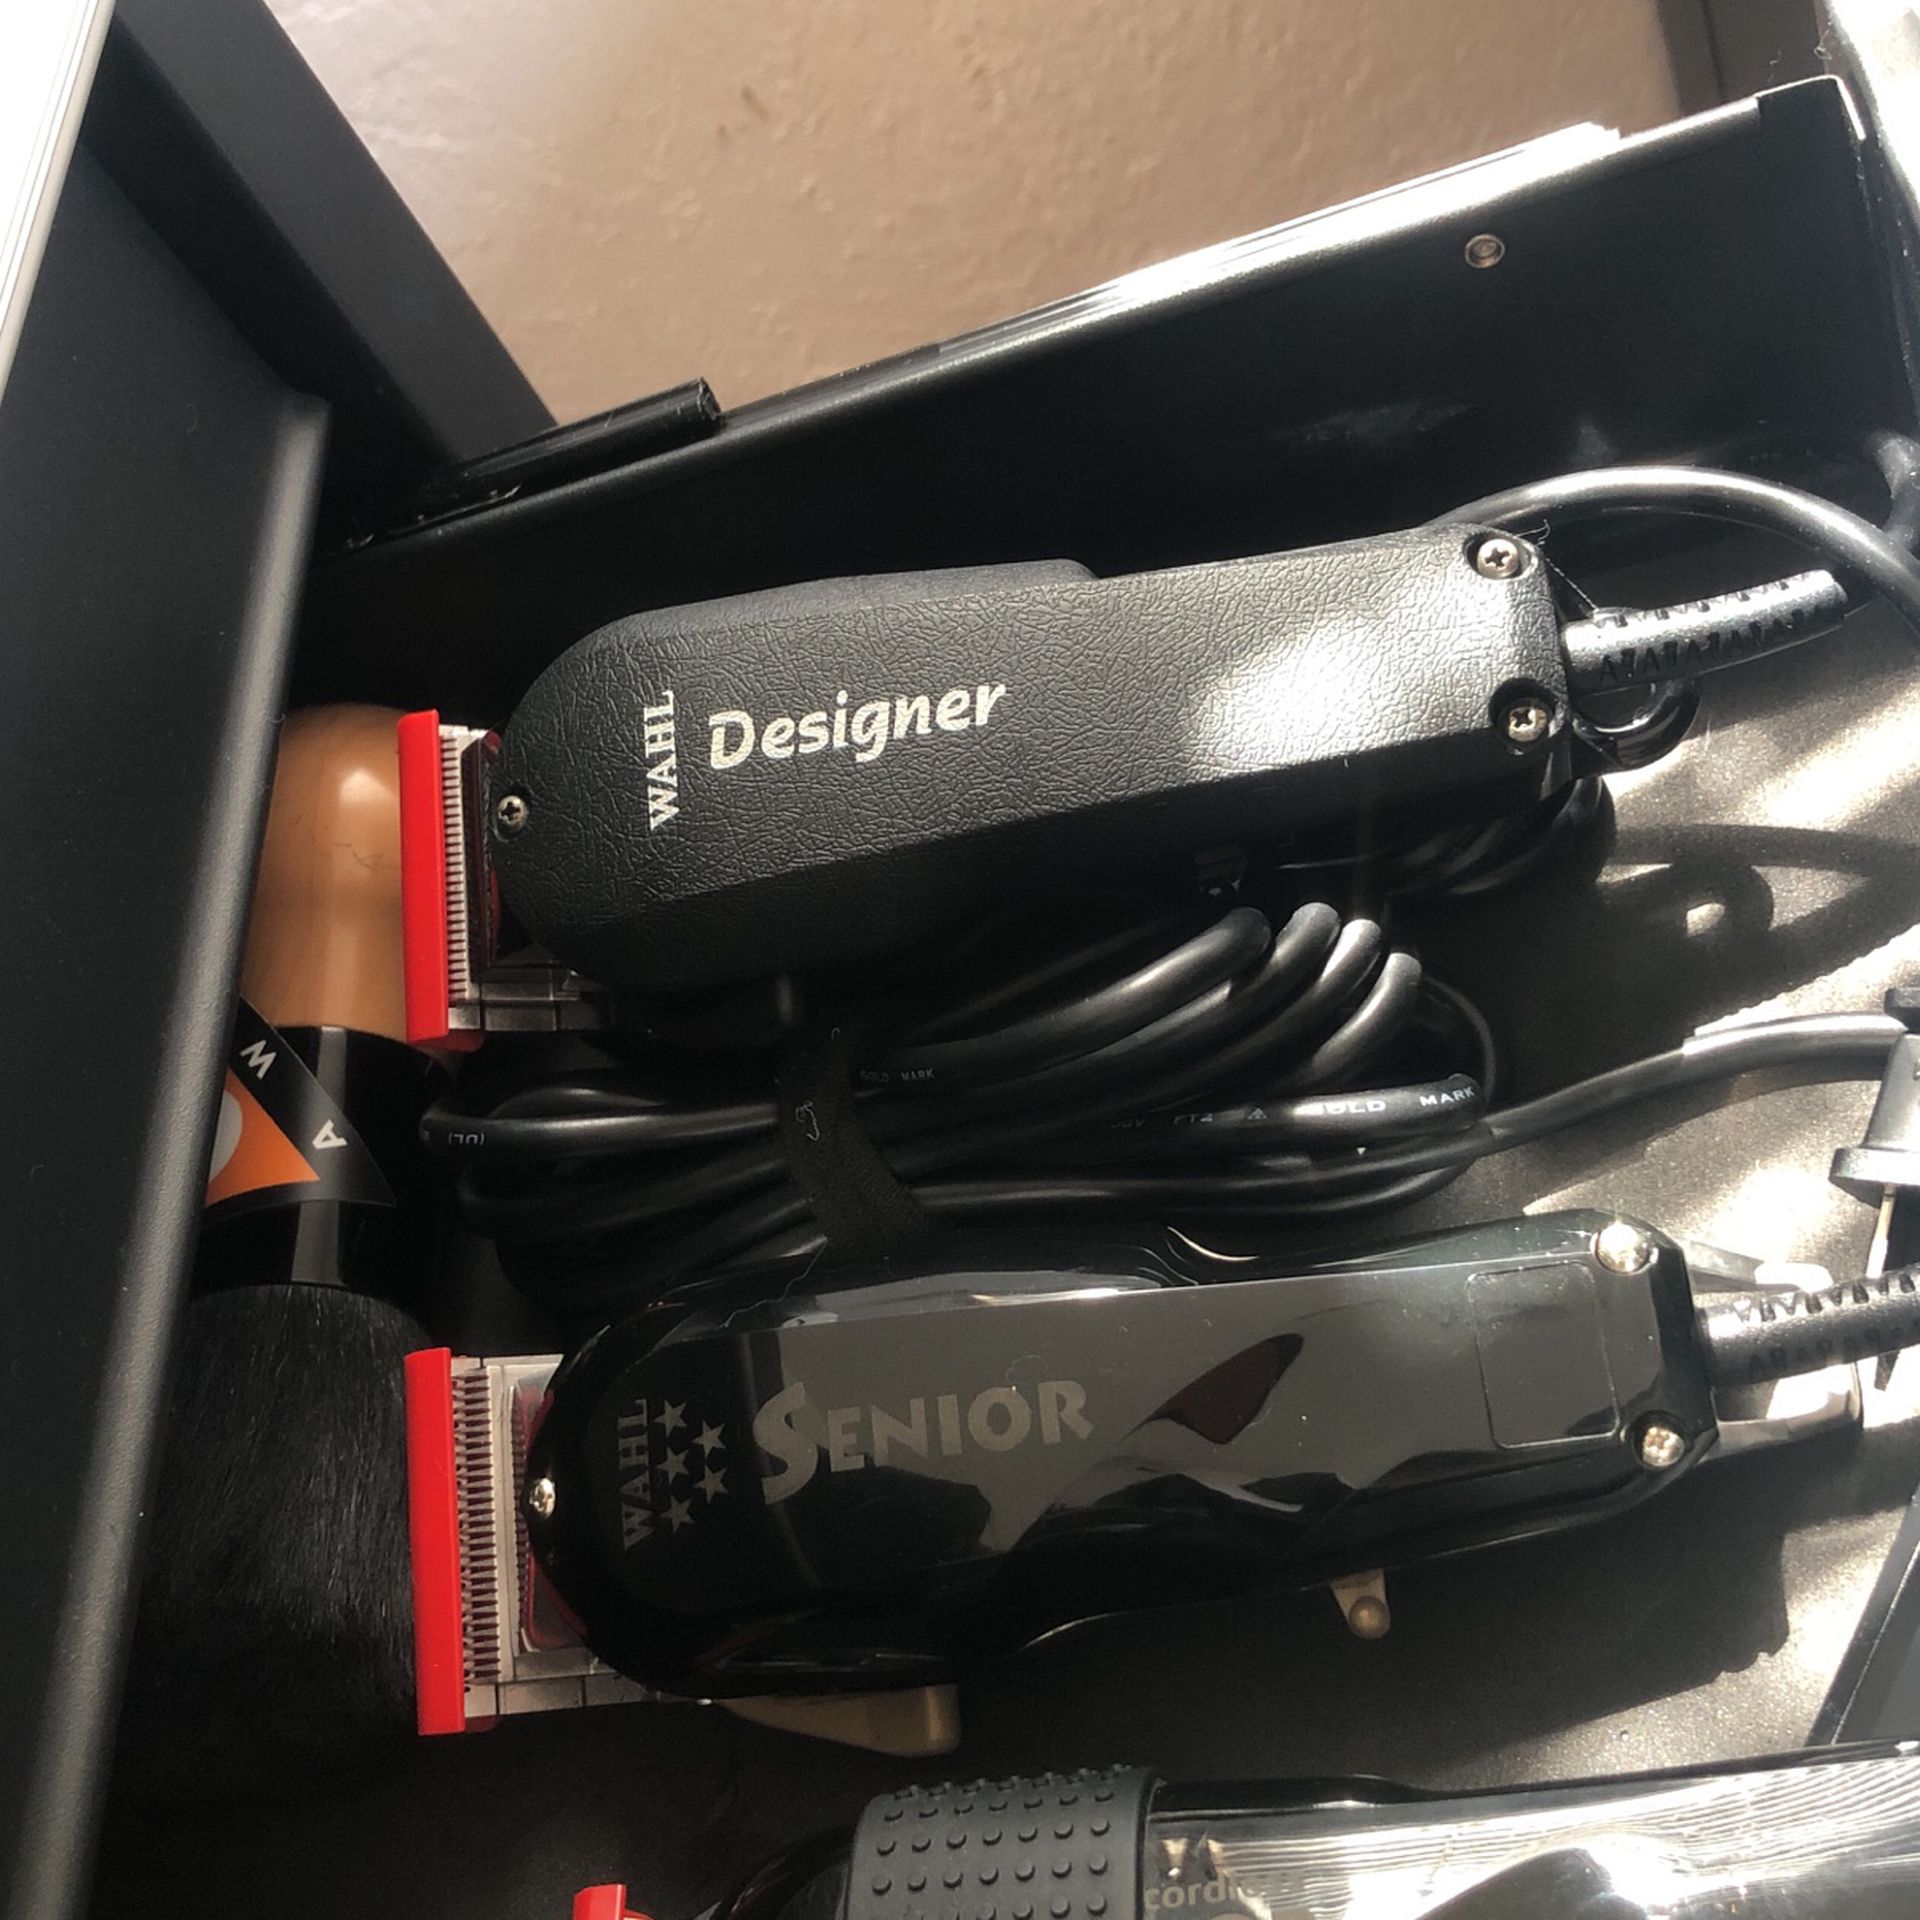 Wahl corder clippers